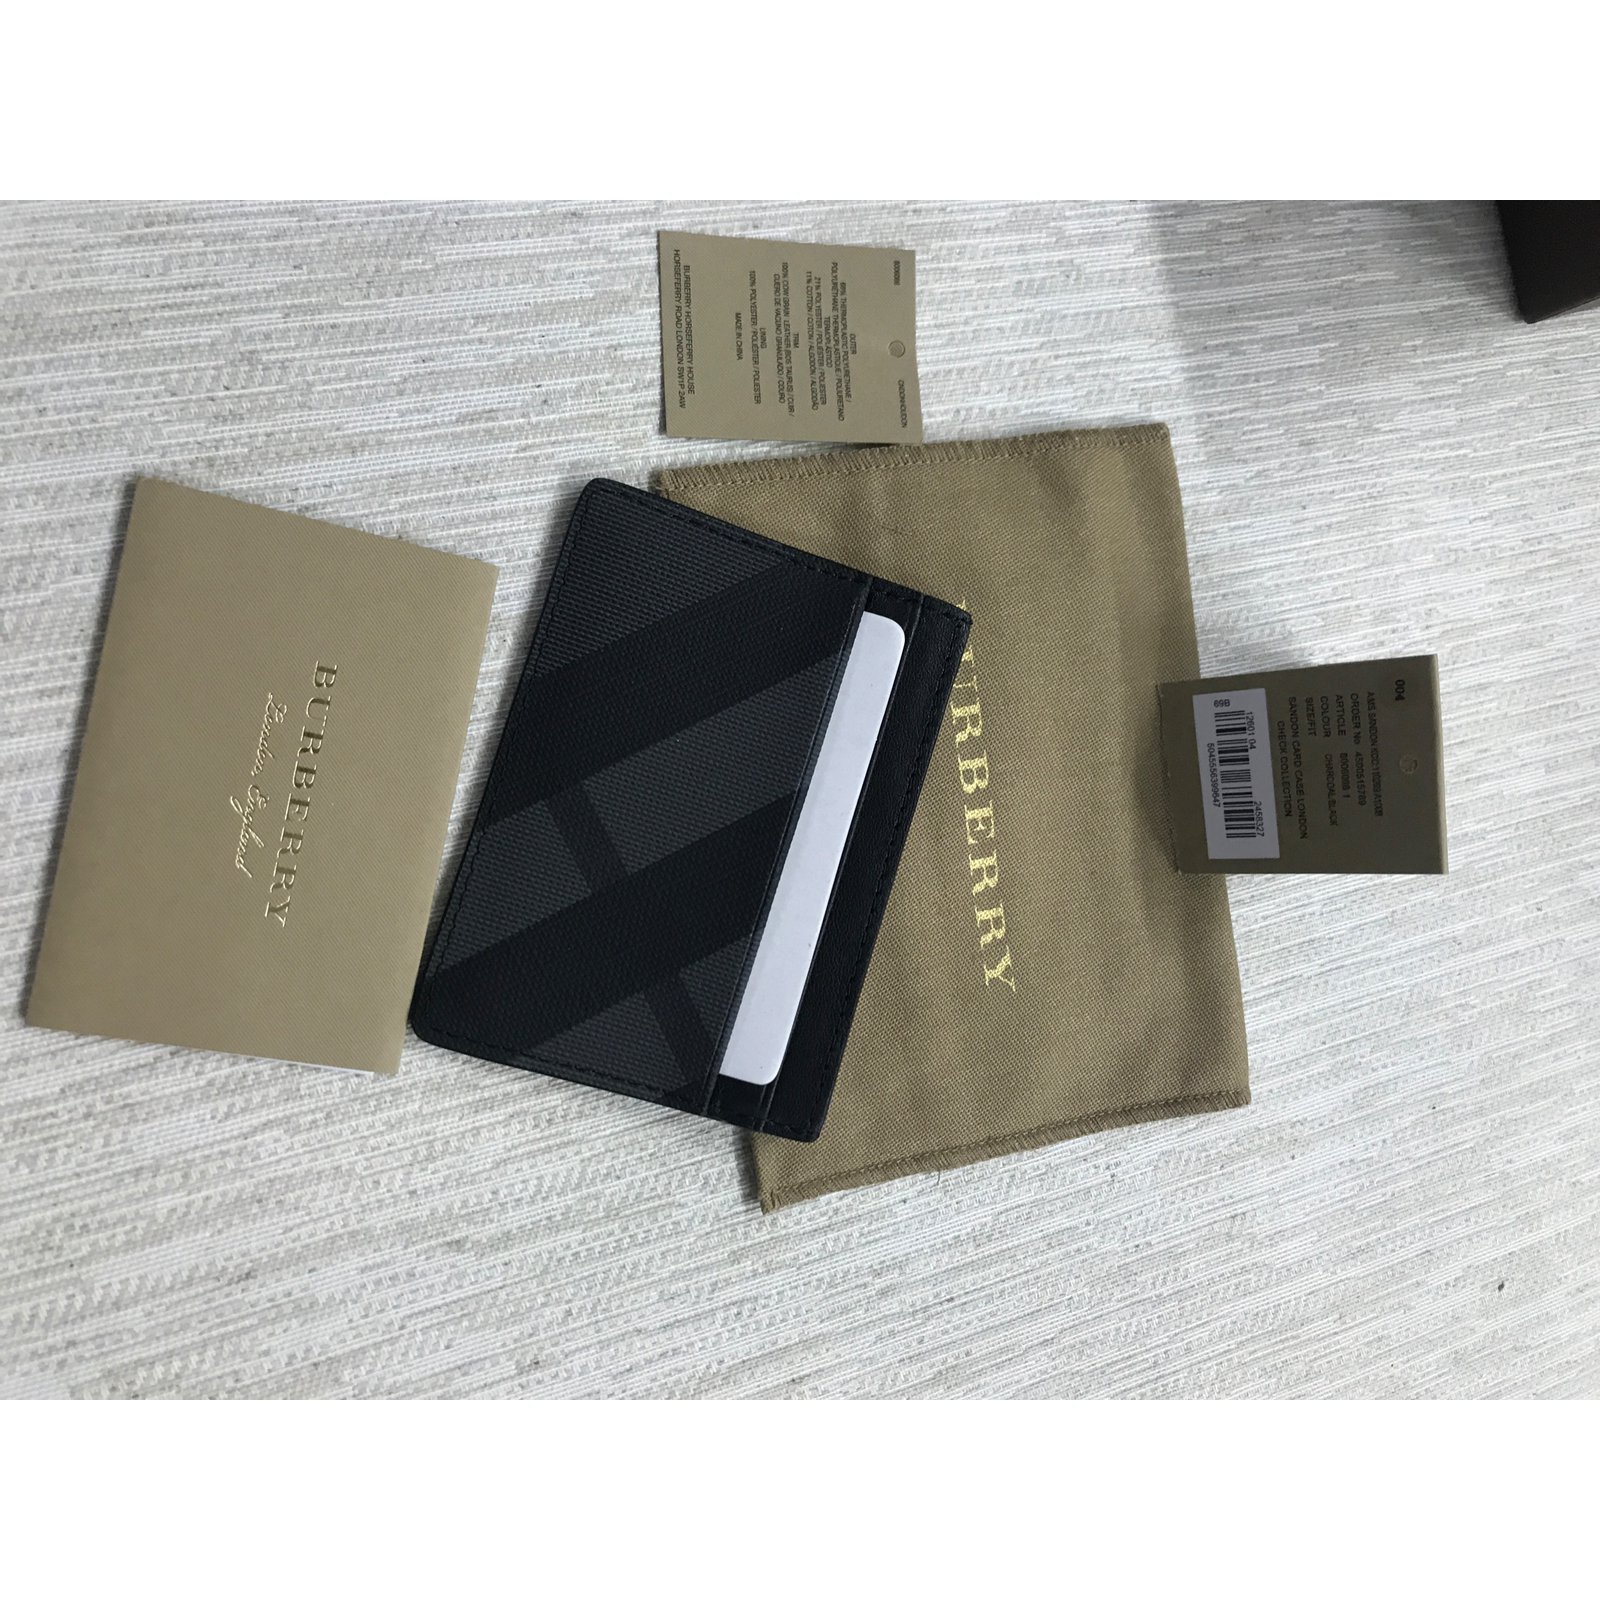 Burberry Check Leather-Trimmed Money Clip Card Holder